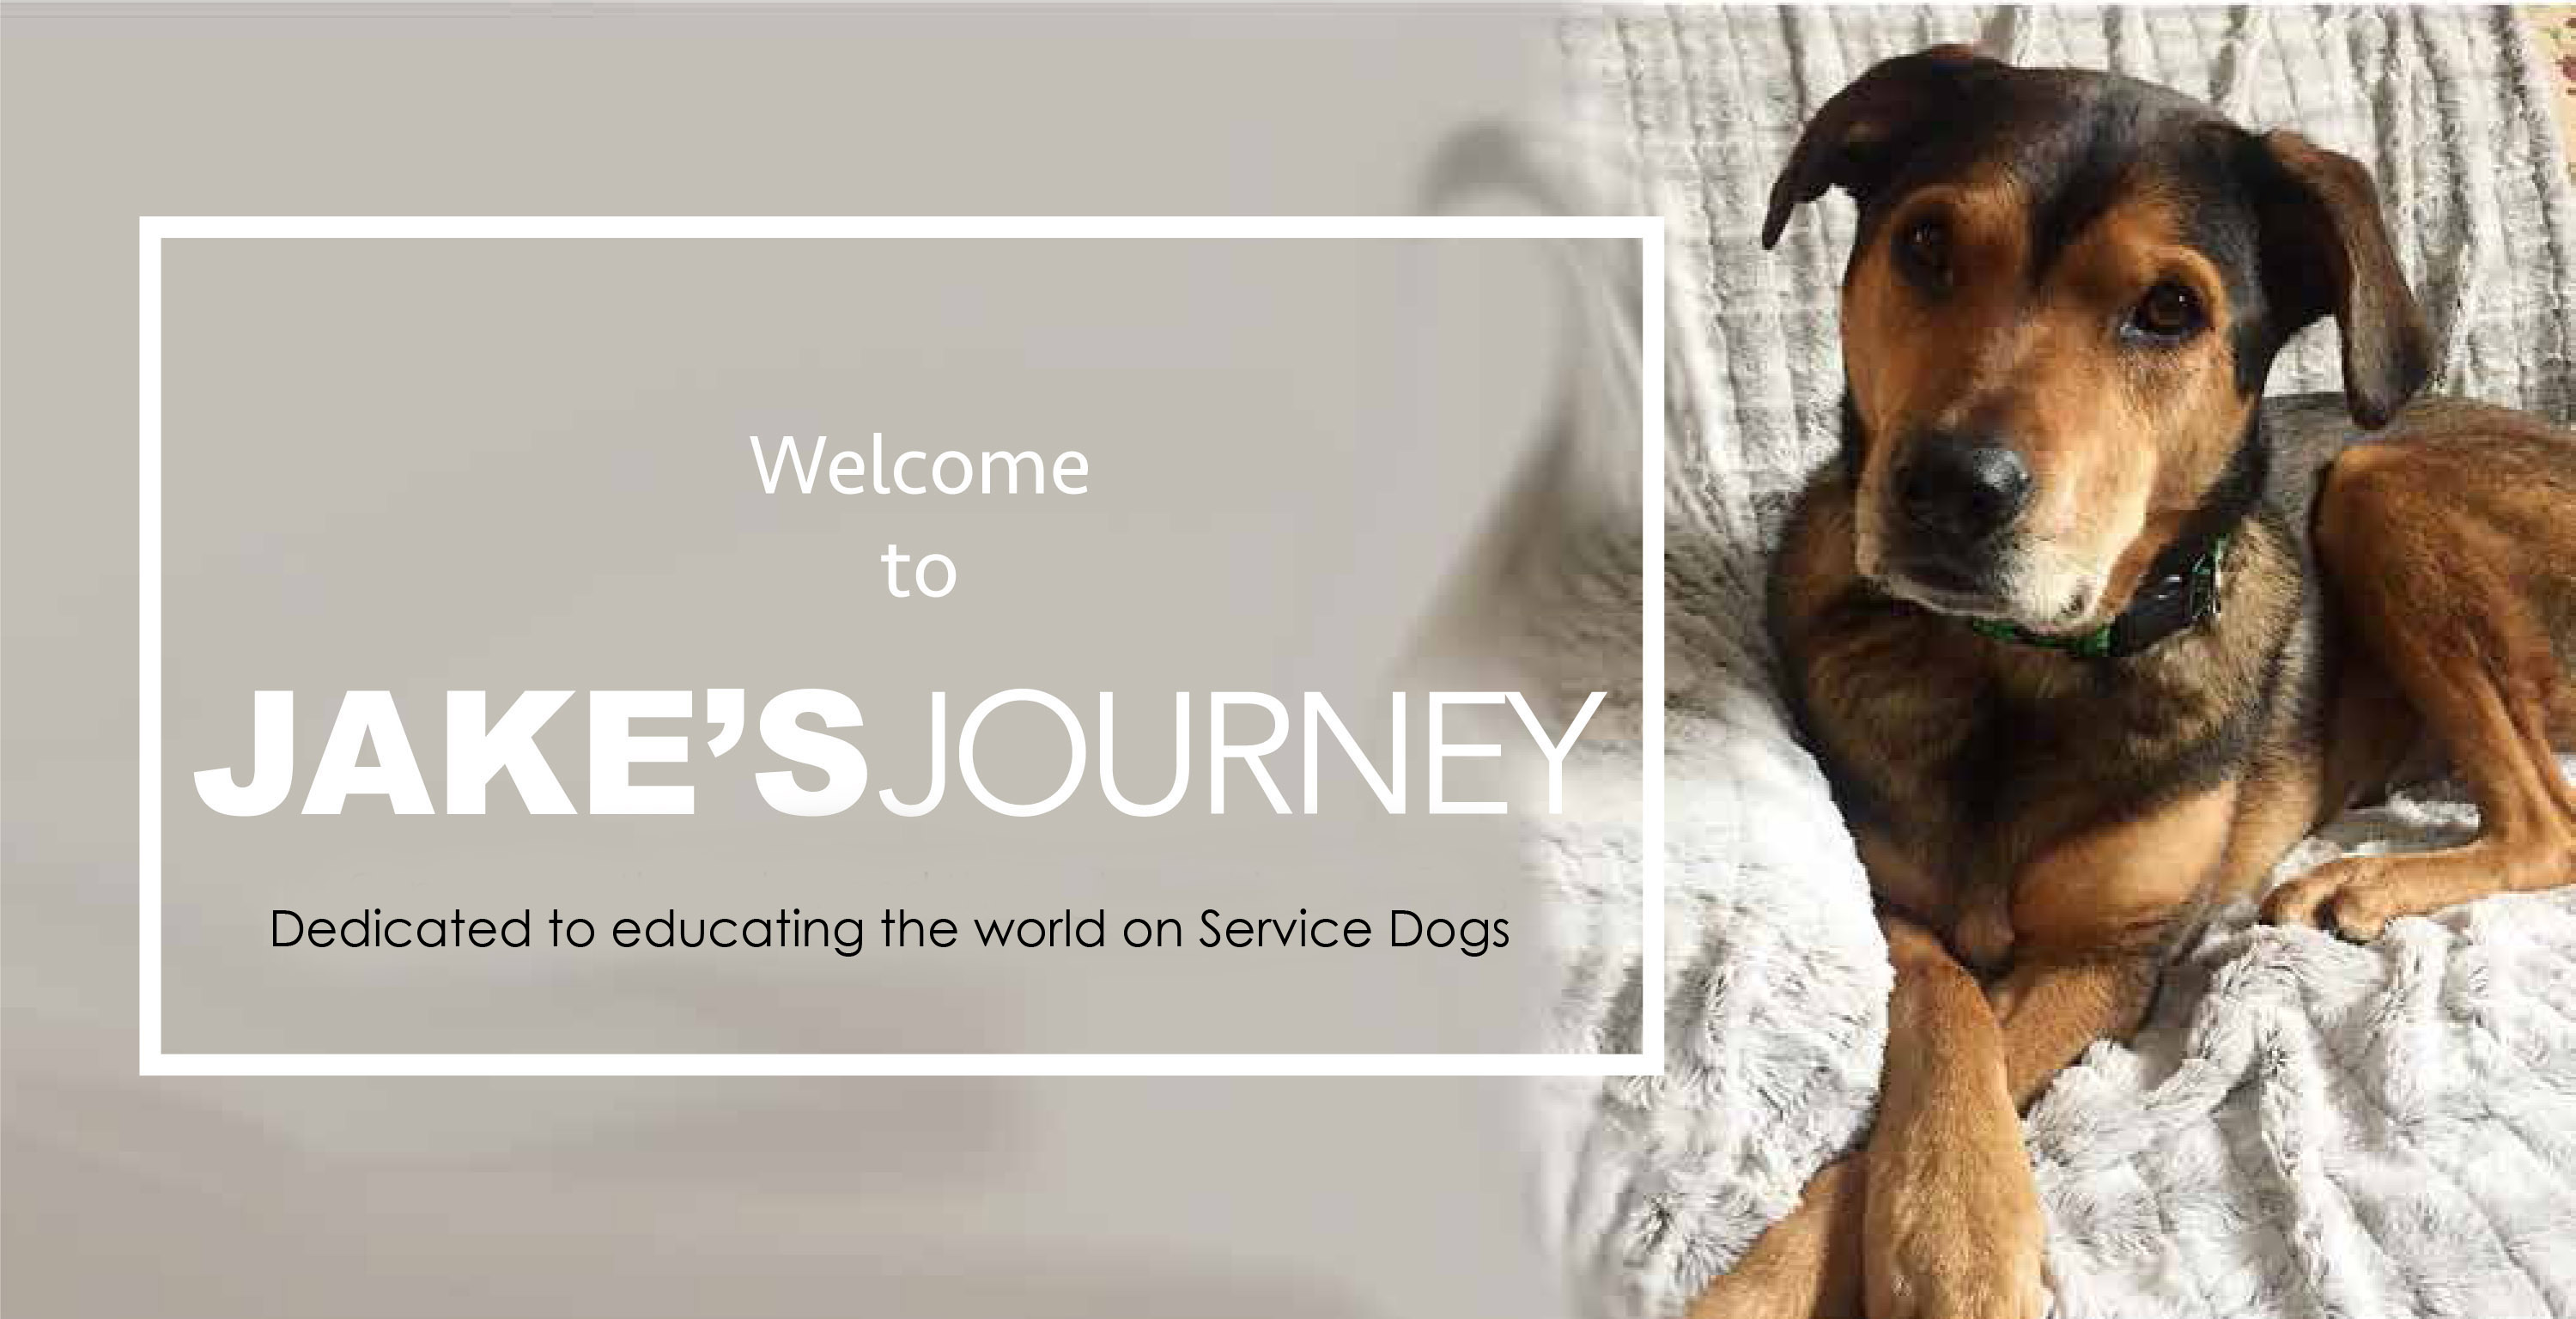 Welcome to Jakes Journey- Dedicated to educating the world on Service Dogs